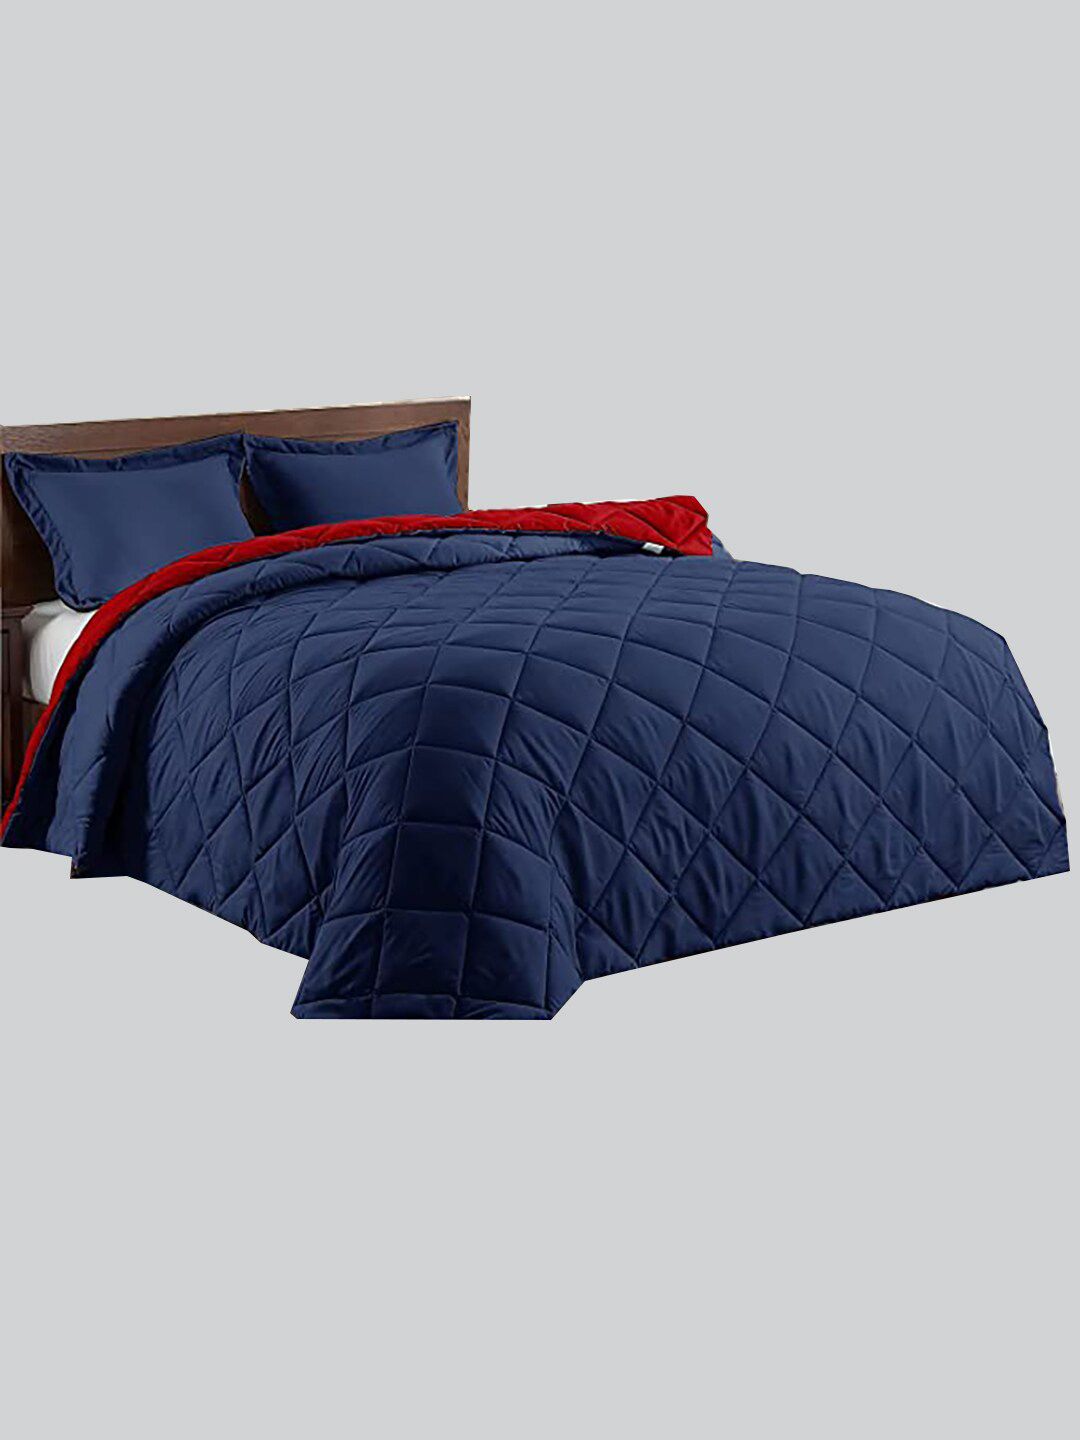 RAASO Blue & Red Microfiber AC Room Reversible Double Bed Blanket Price in India